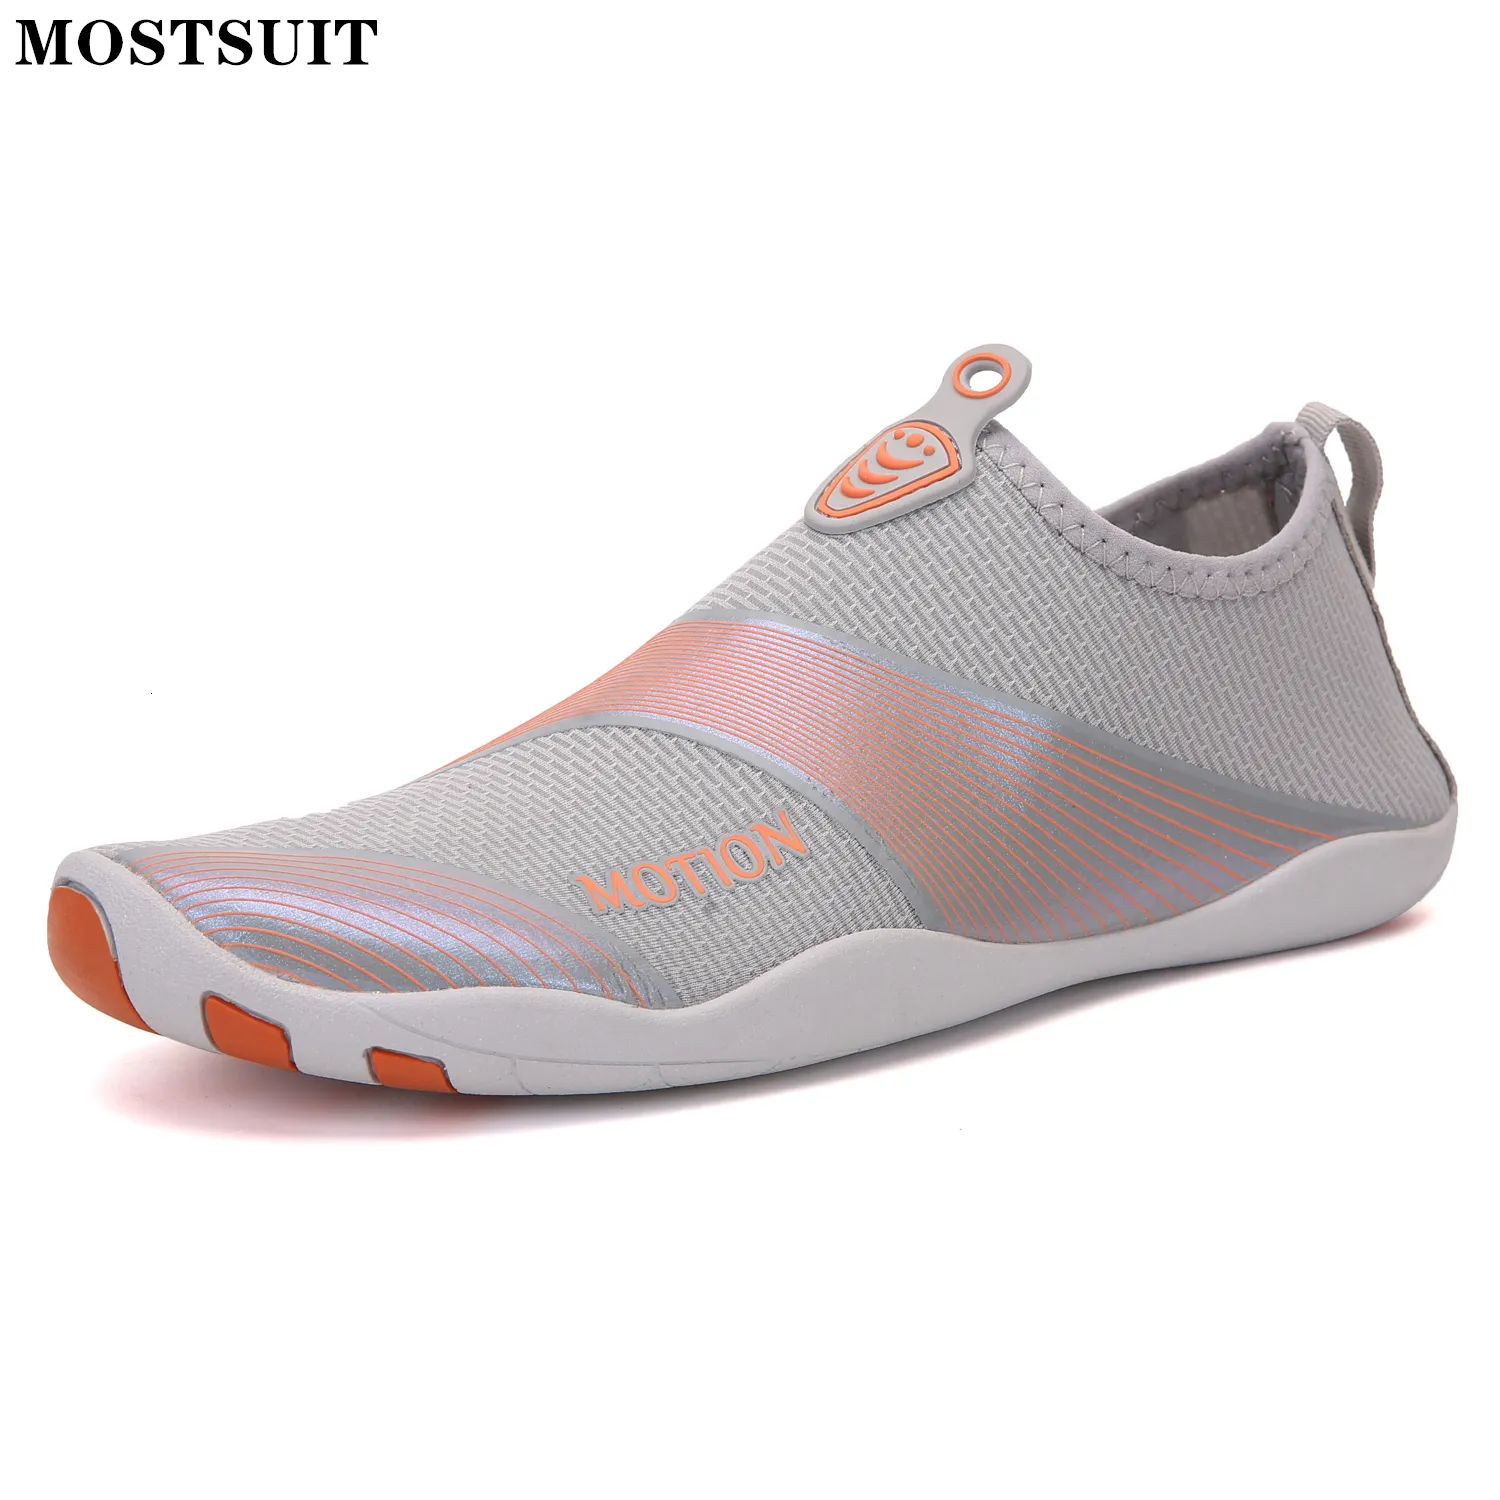 Water Shoes Soft Flat Quick-Dry Sport Water Shoes Women Sneaker Aqua Shoes Mans Footwear For Swimming Driving Beach Wading Fishing Fitness 230724